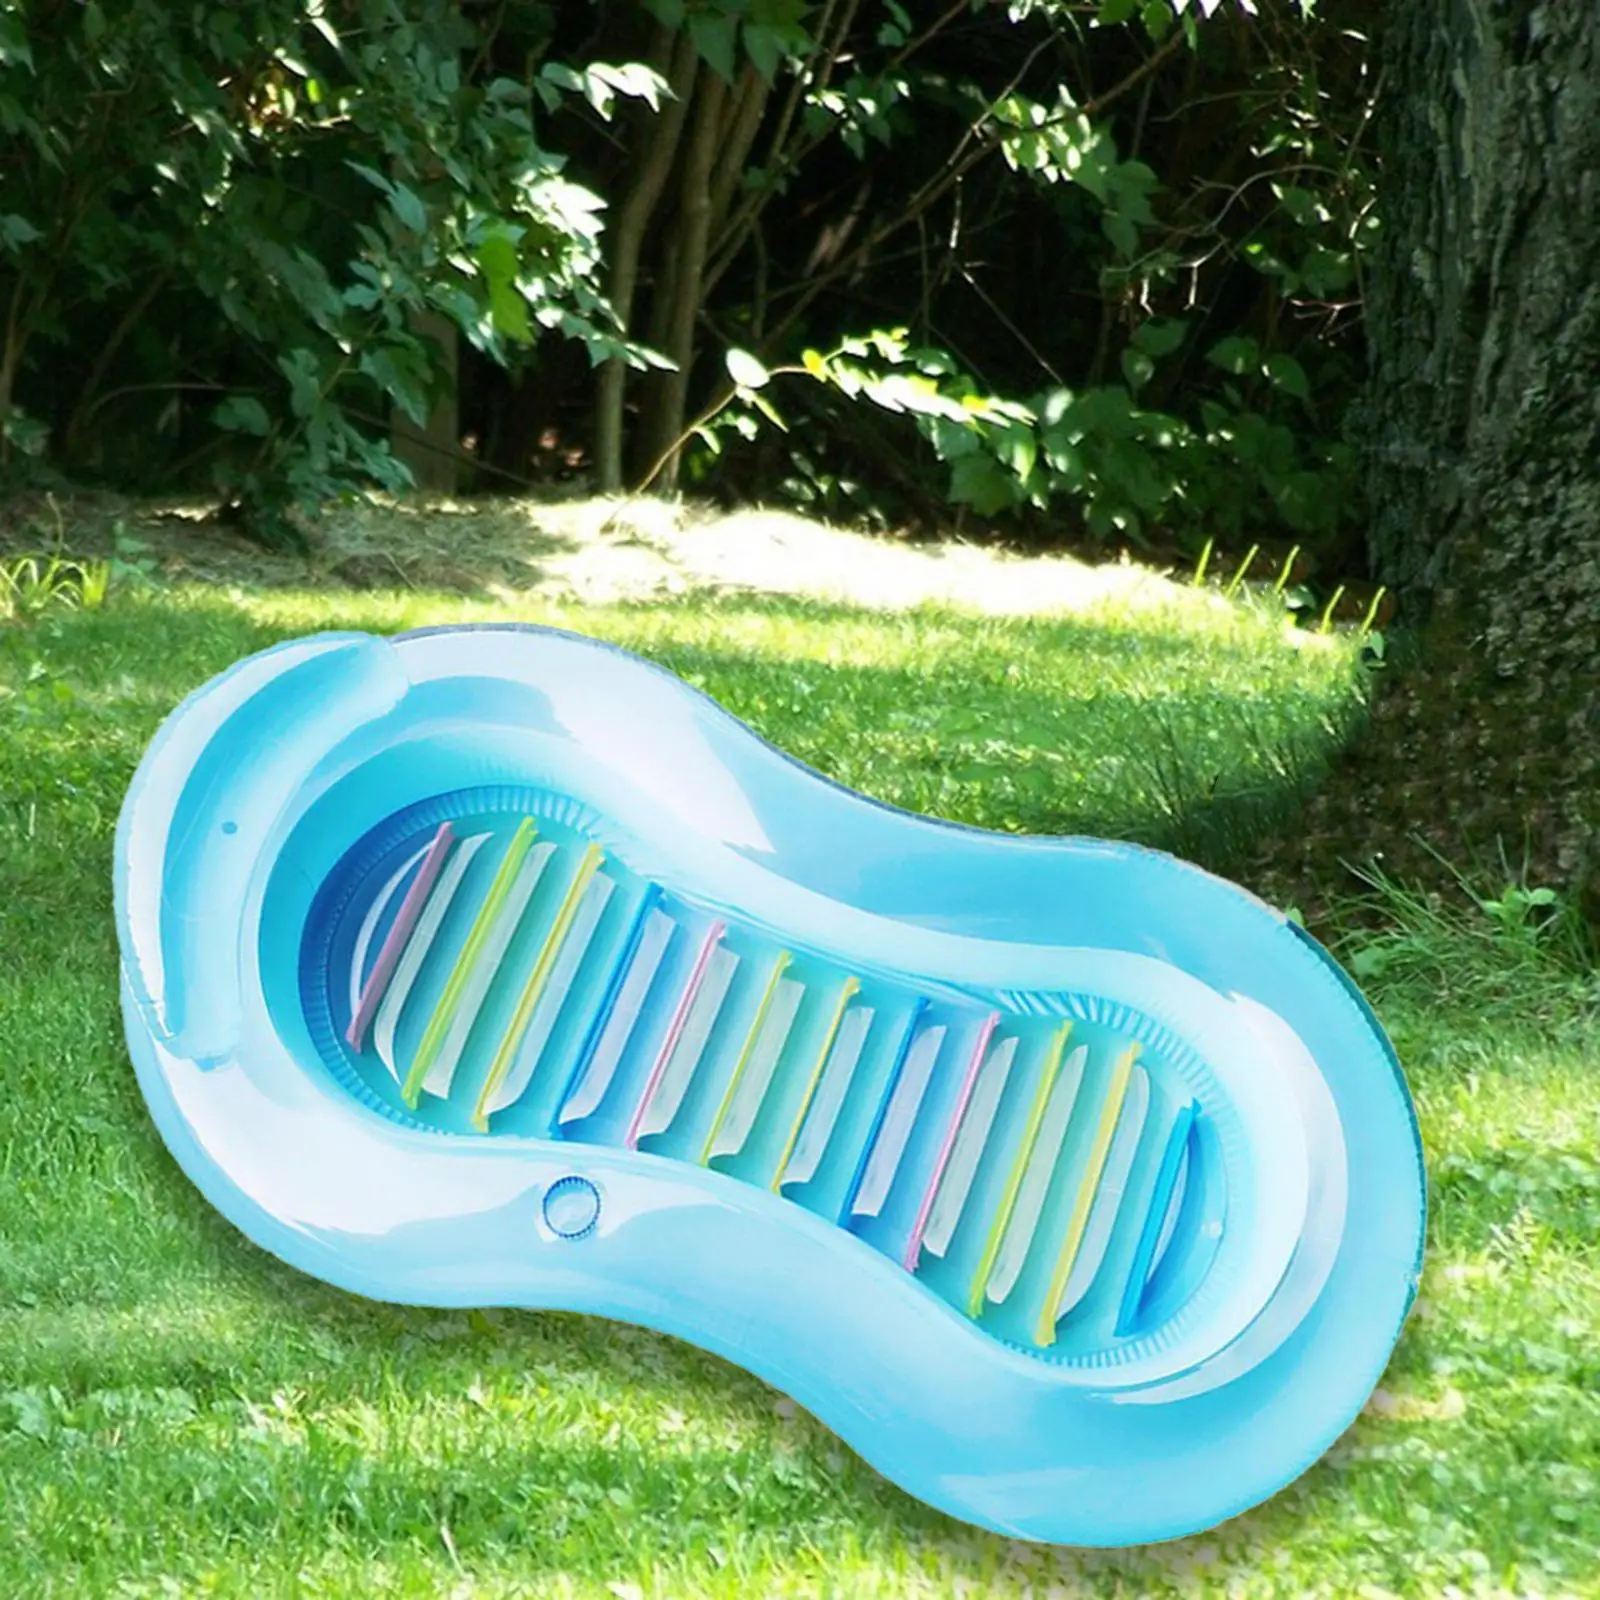 PVC Pool Floats Pool Floats Lounge Water Mattress Mat Floating Rafts Pool Floats Hammock for Outdoor